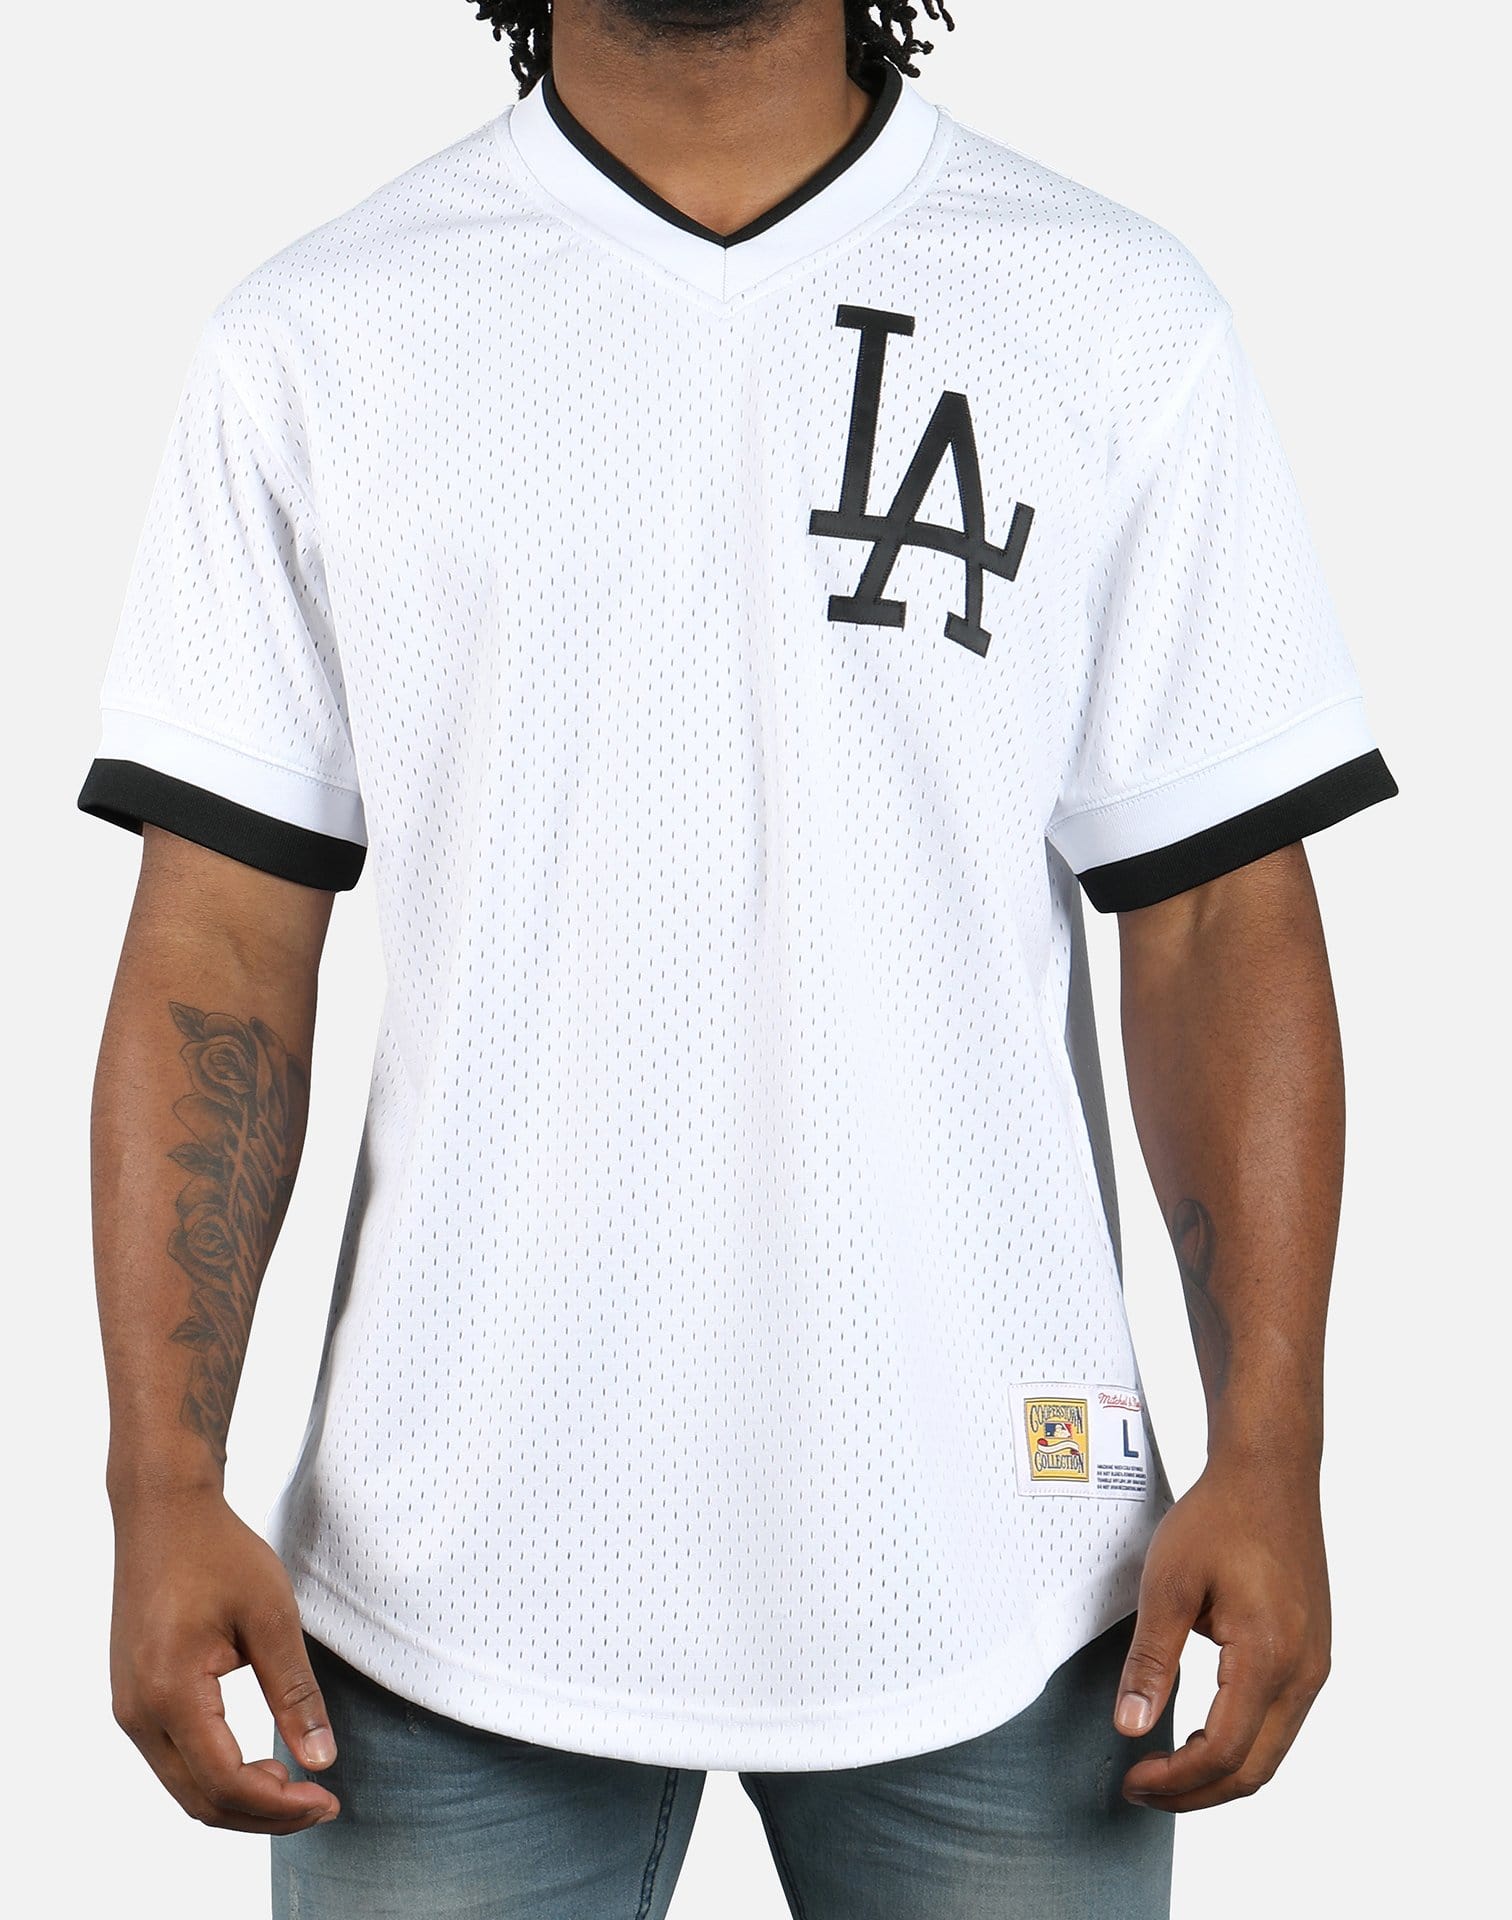 mitchell and ness dodgers jersey